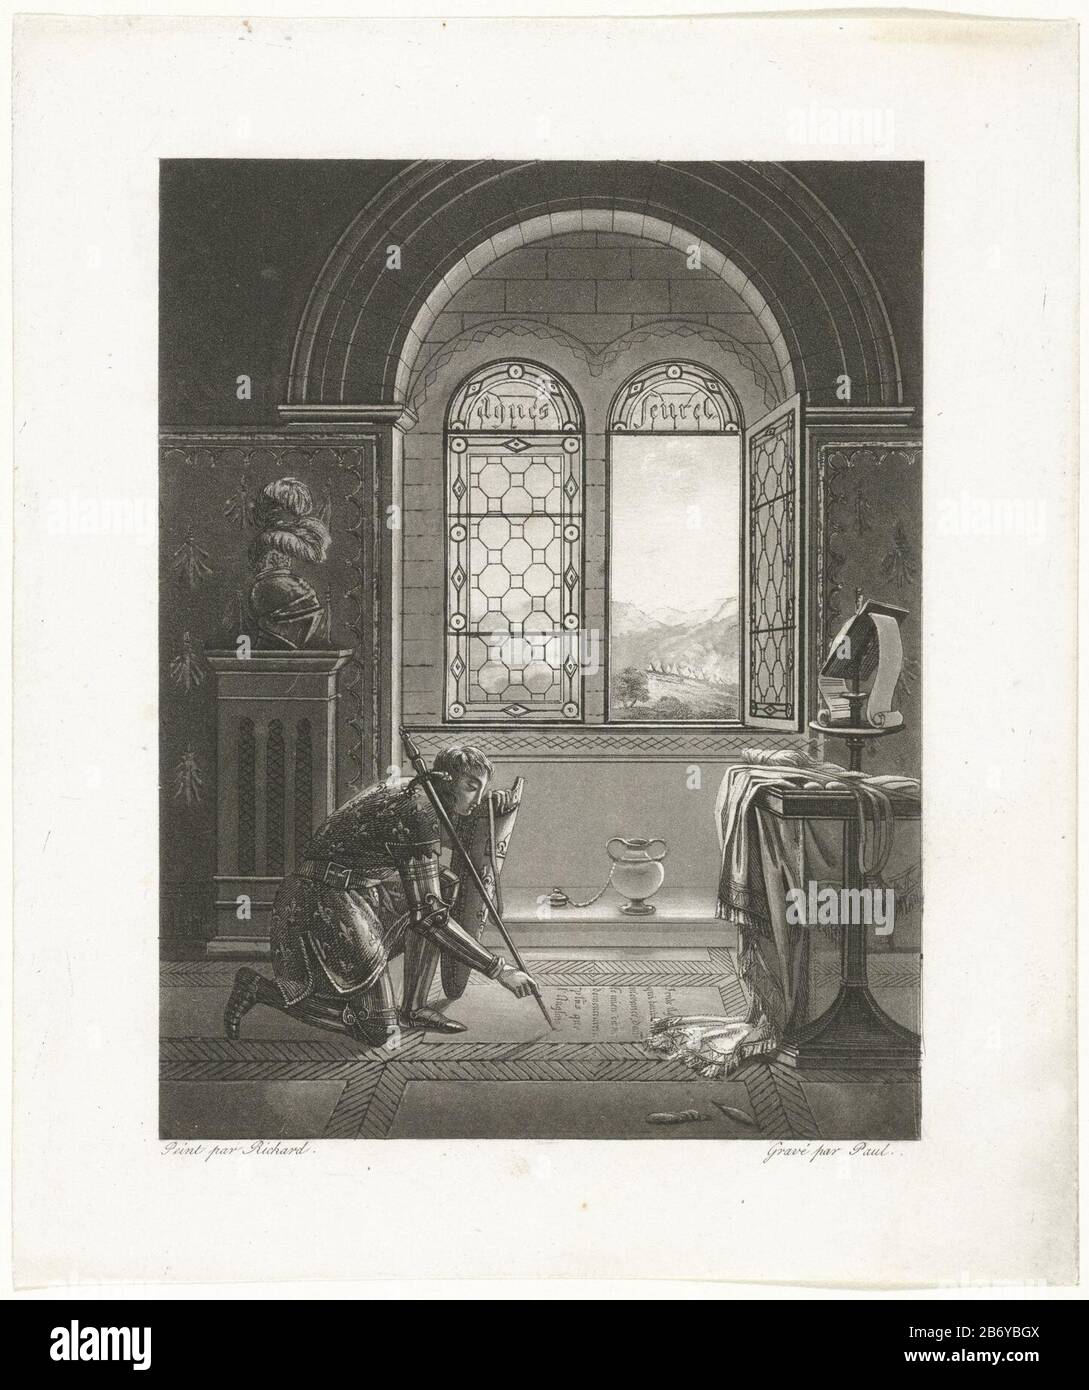 Kasteelvertrek met Jeanne d'Arc Castle out with Joan of Arc in armor. She scratched her lance French text of the English in the stone floor. The stained-glass window, the name of Agnès Sorel (Agnes Seurel), the mistress of Charles VII of Frankrijk. Manufacturer : printmaker Paul (engraver) (listed building) to painting: Richard (listed property) Place Manufacture: France Date: 1750 - 1850 Physical characteristics: etching and aquatint material: paper Technique: etching / aquatint dimensions: sheet: 169 mm × h 144 b mm Subject: Joan of Arc (Jeanne d'Arc); possible attributes: armor, banner, lan Stock Photo